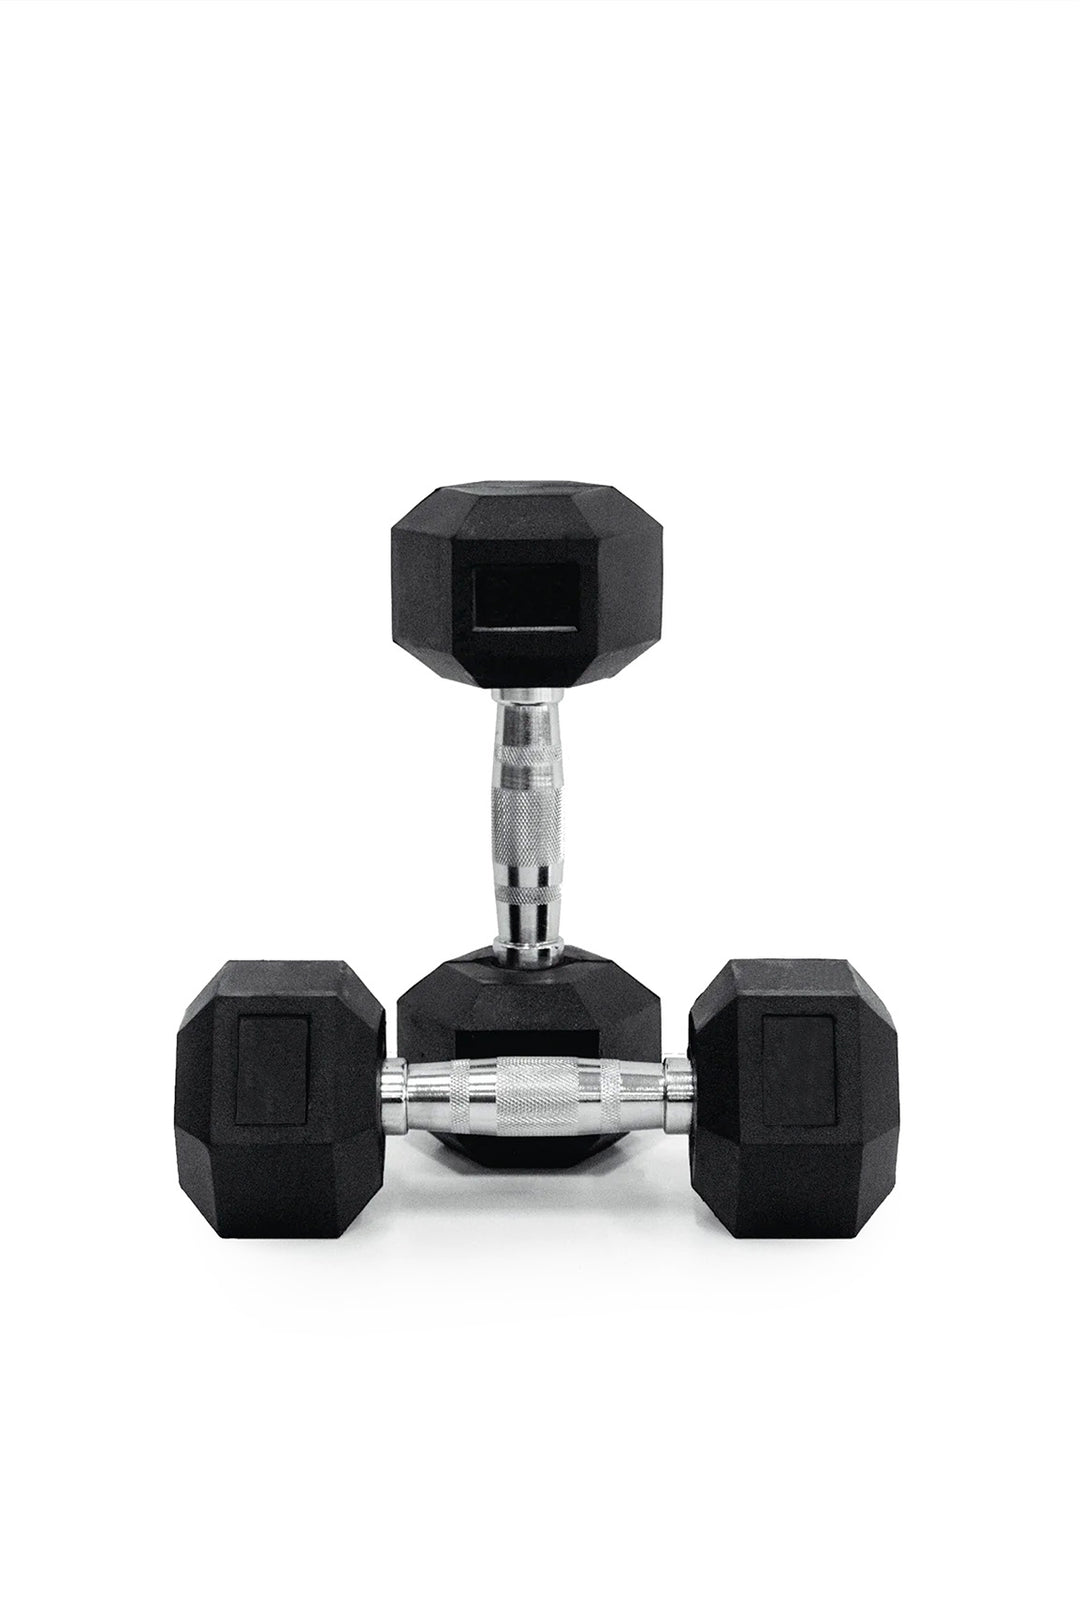 4kg Body Iron Commercial Rubber Hex Dumbbell Pair